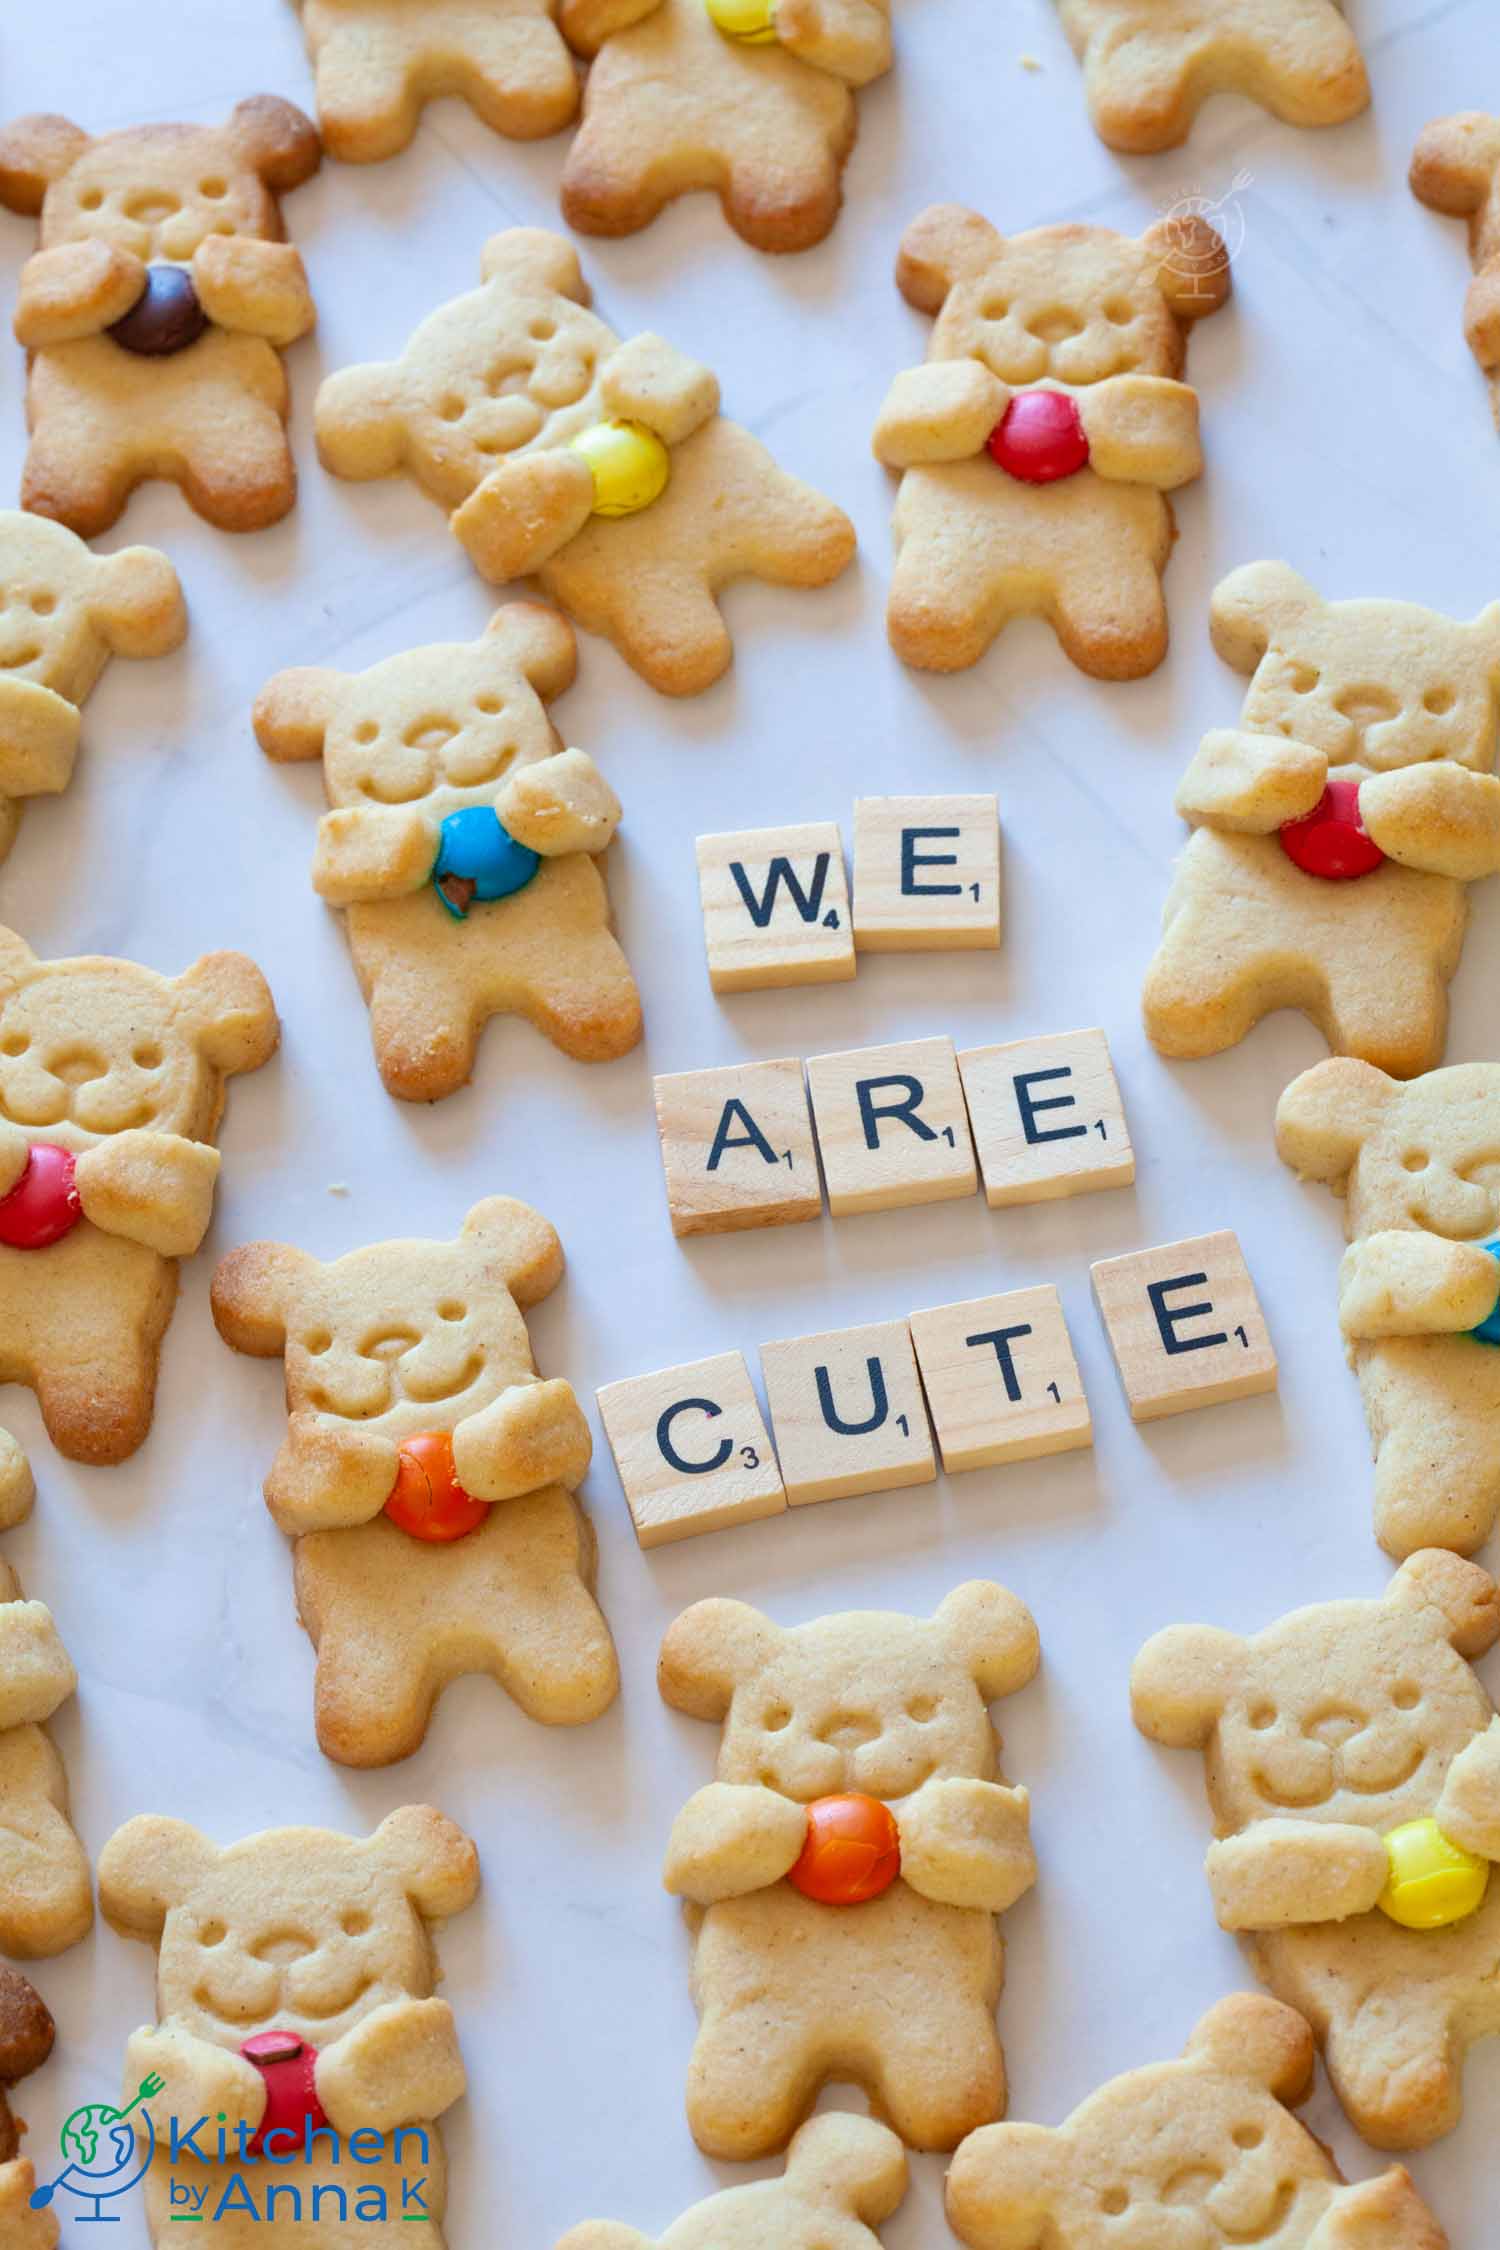 Teddy bear biscuits - Cooking with my kids